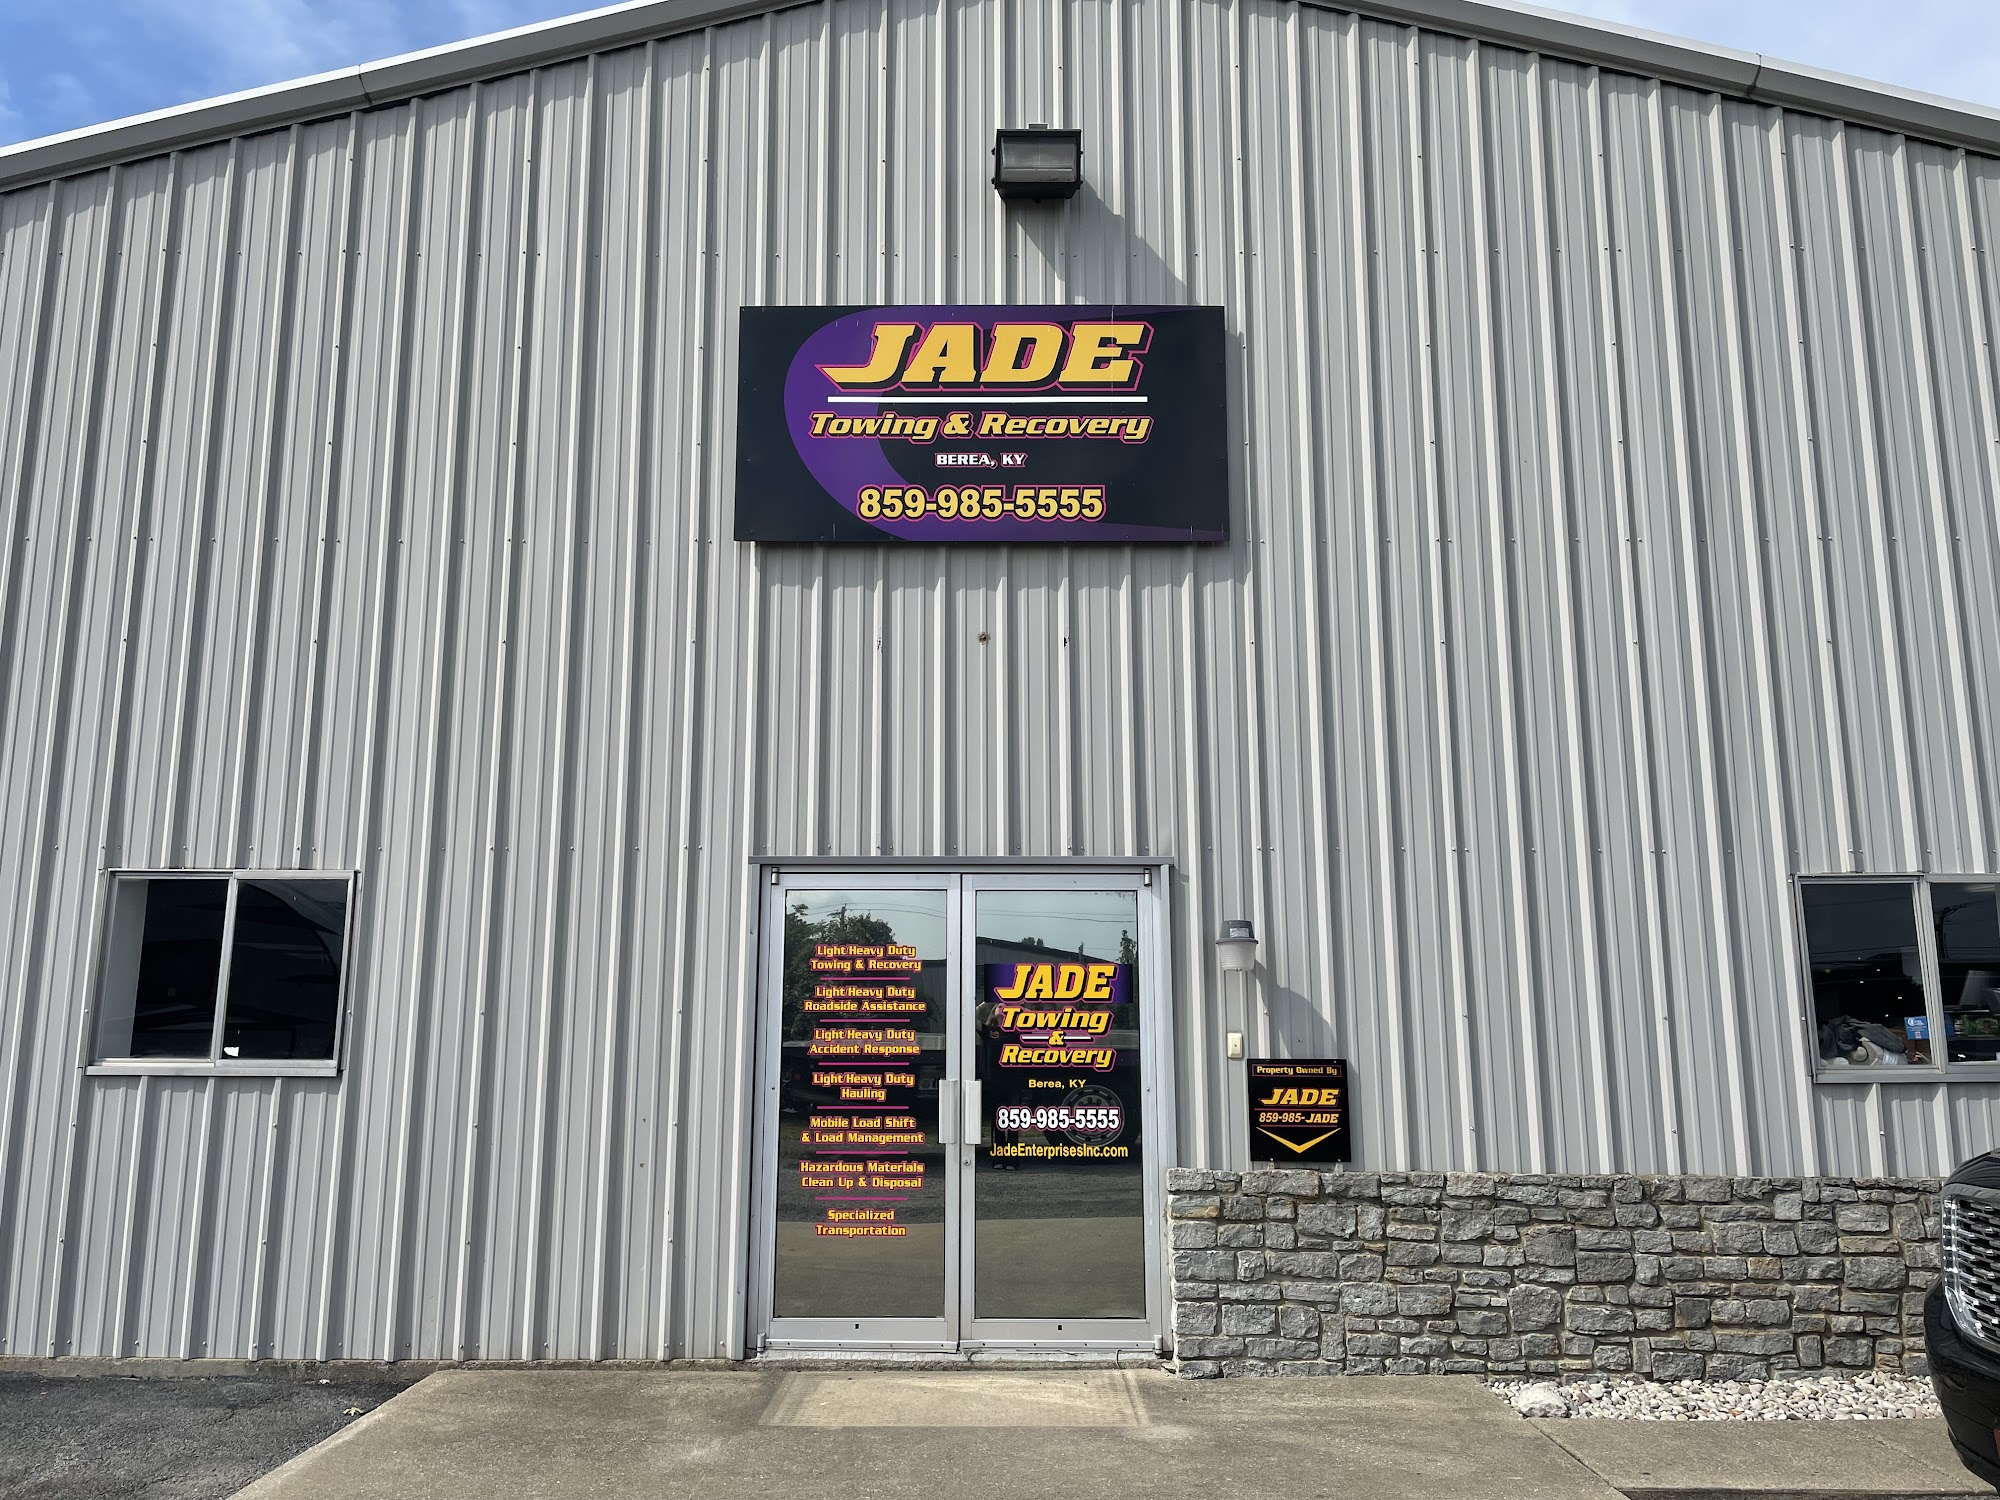 JADE LIGHT & HEAVY DUTY TOWING AND RECOVERY LLC.